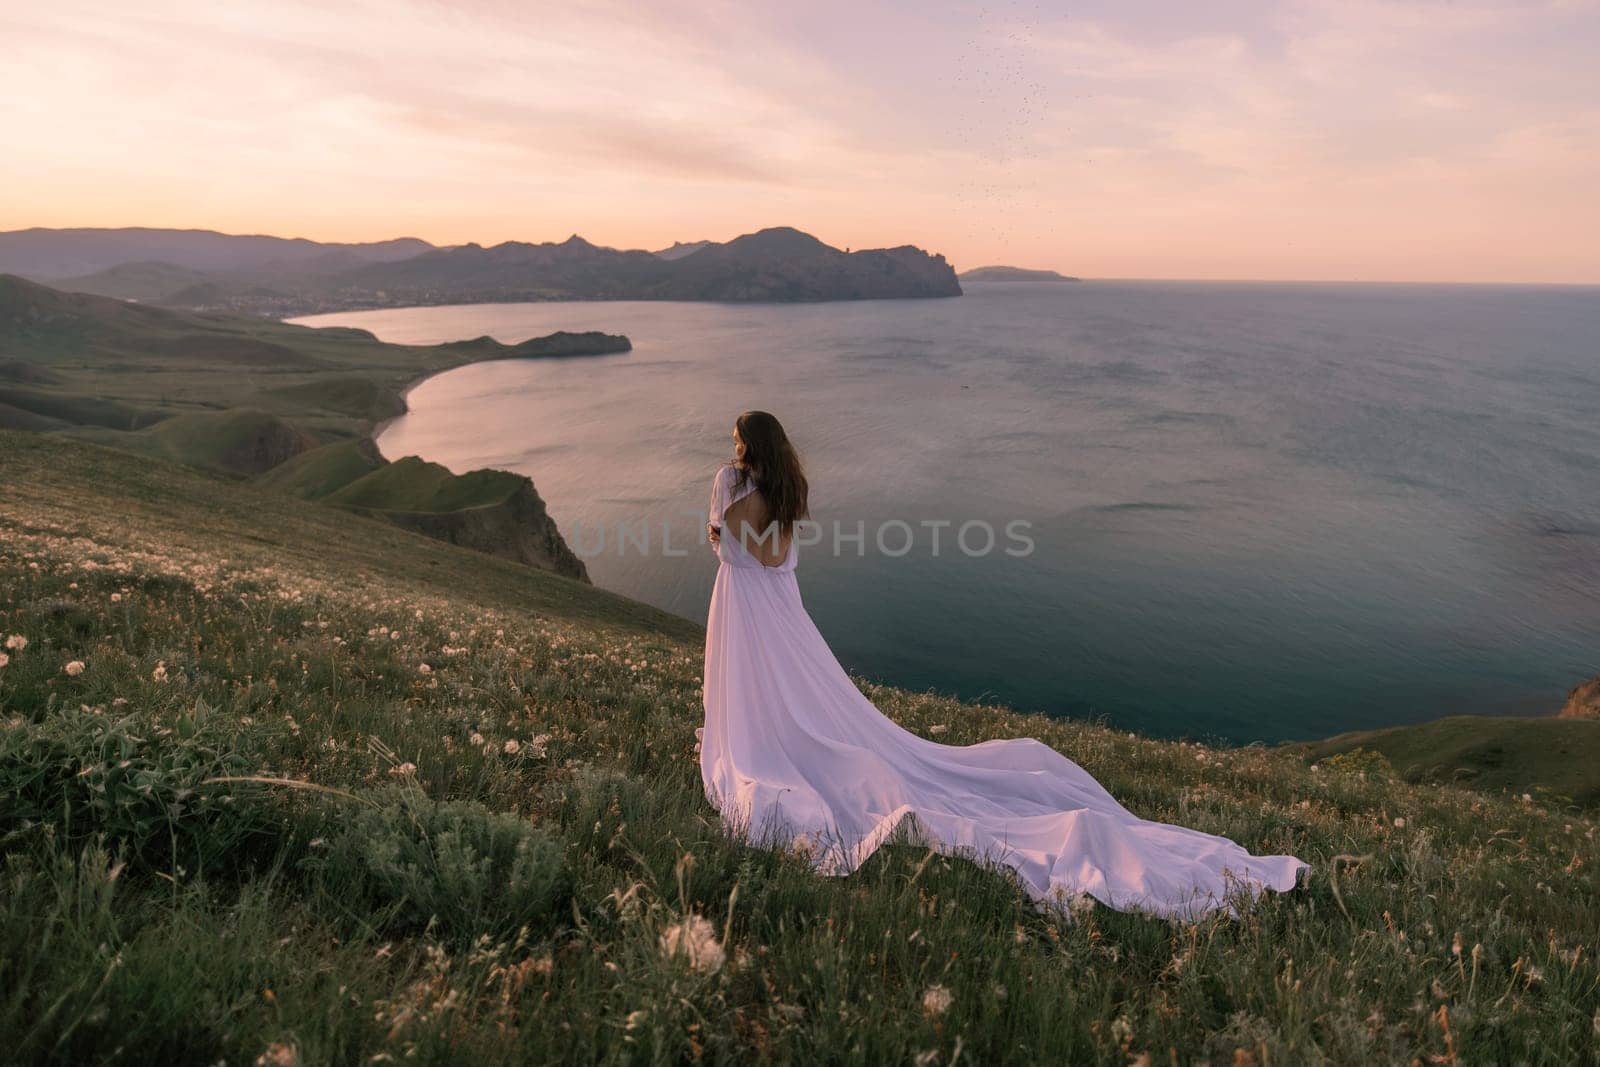 A woman in a white dress stands on a hill overlooking the ocean. The scene is serene and peaceful, with the woman's dress flowing in the wind